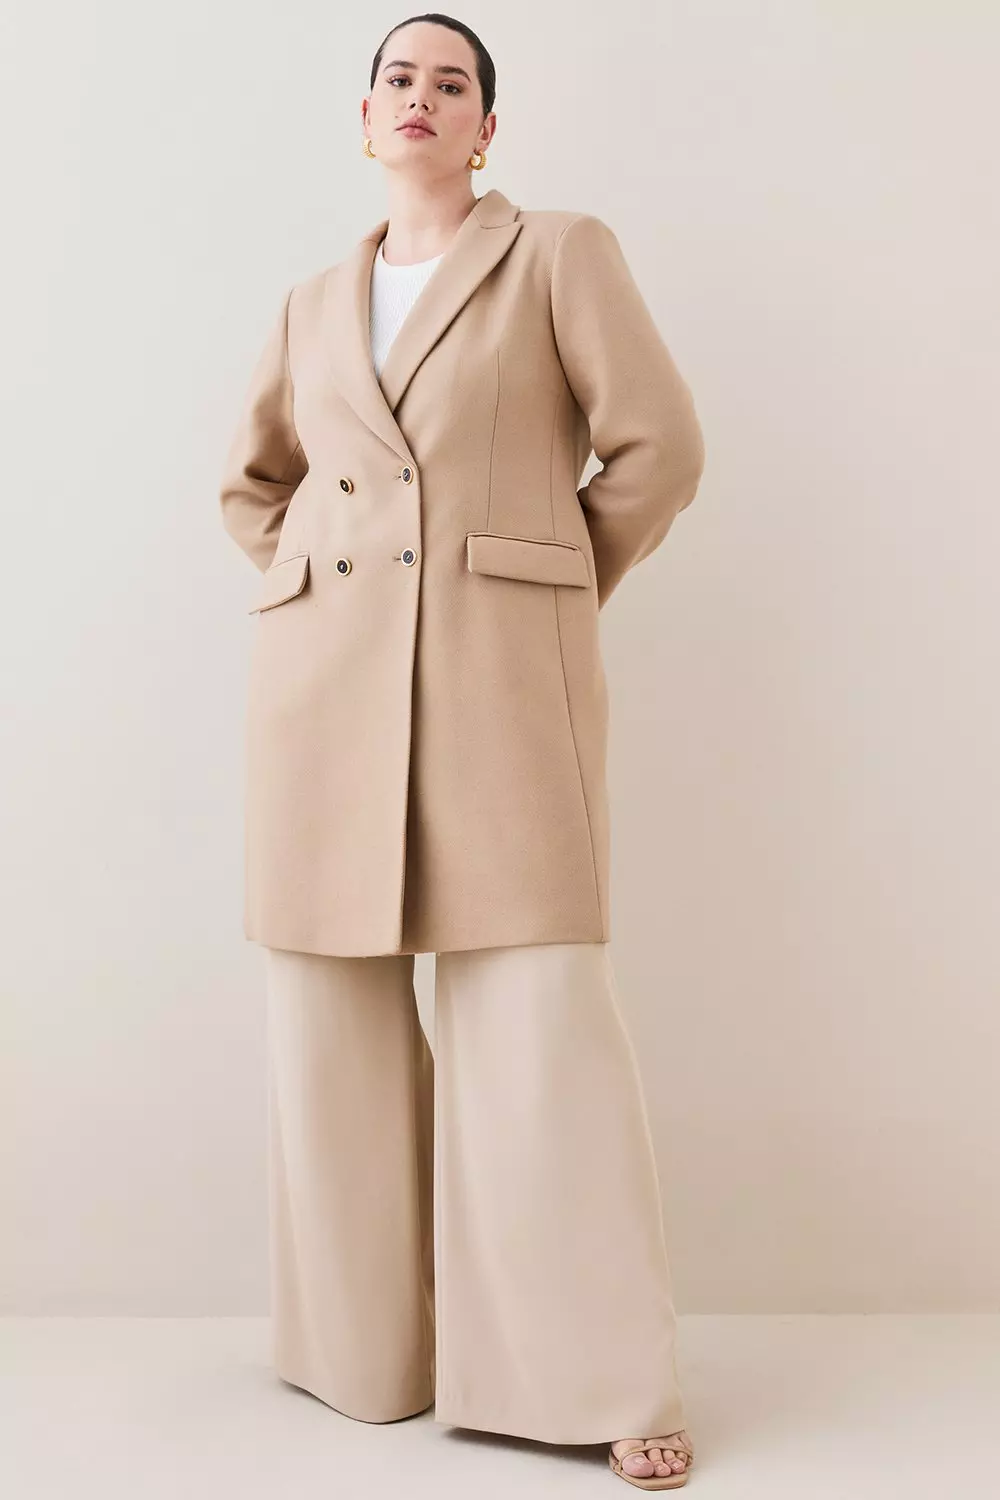 Plus Size Italian Wool Double Breasted Tailored Coat